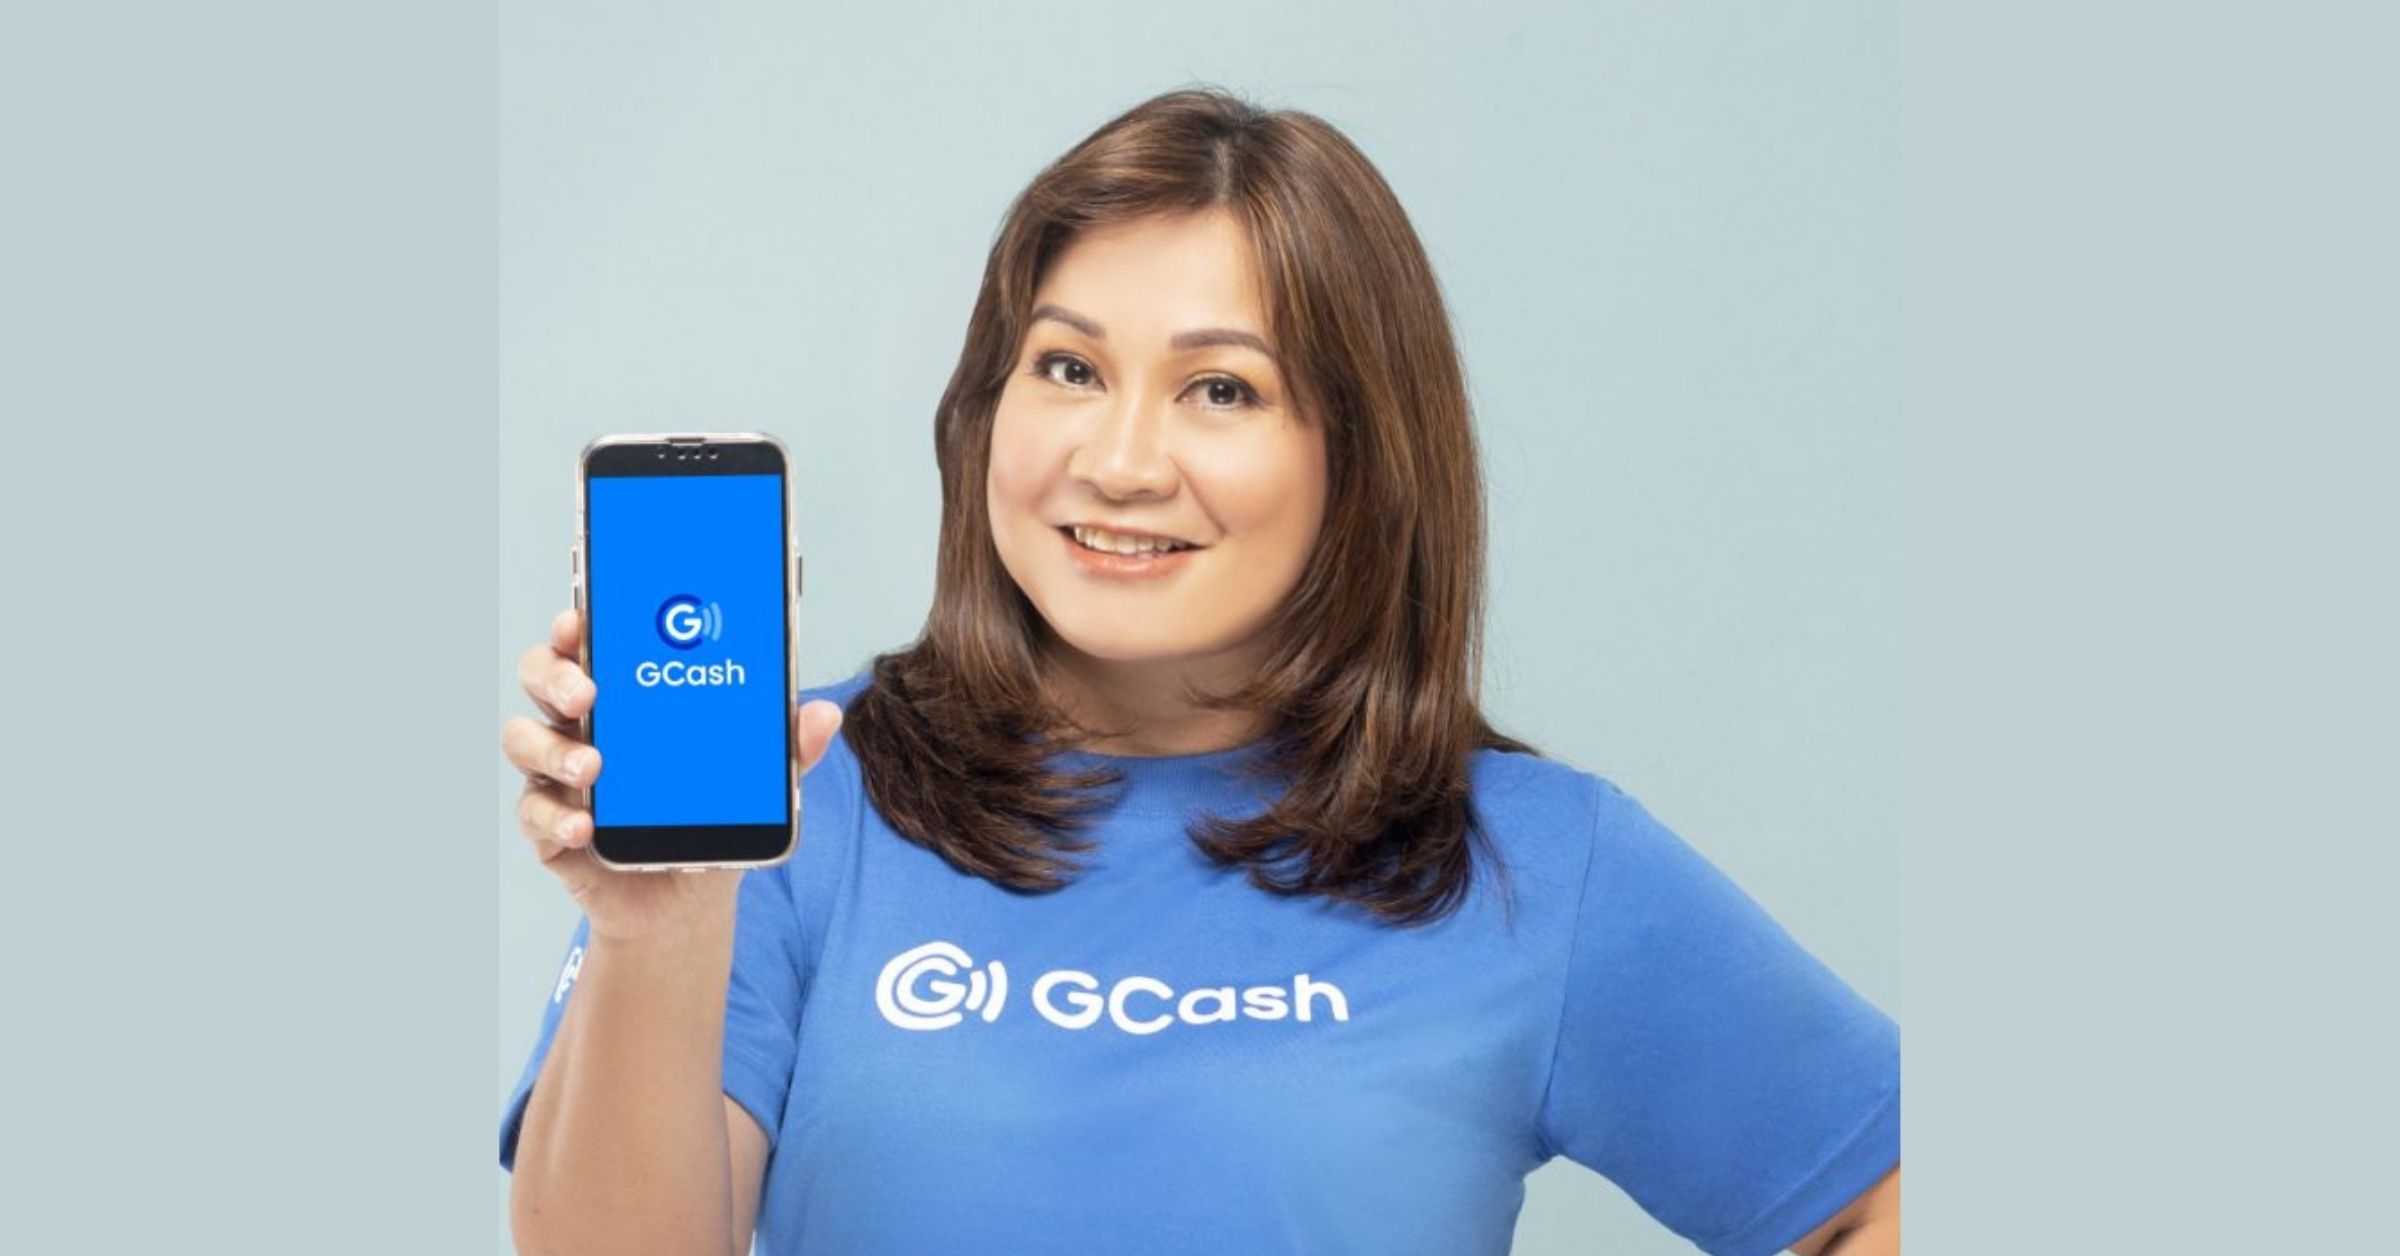 GCash now offers fast, secure ways to buy crypto